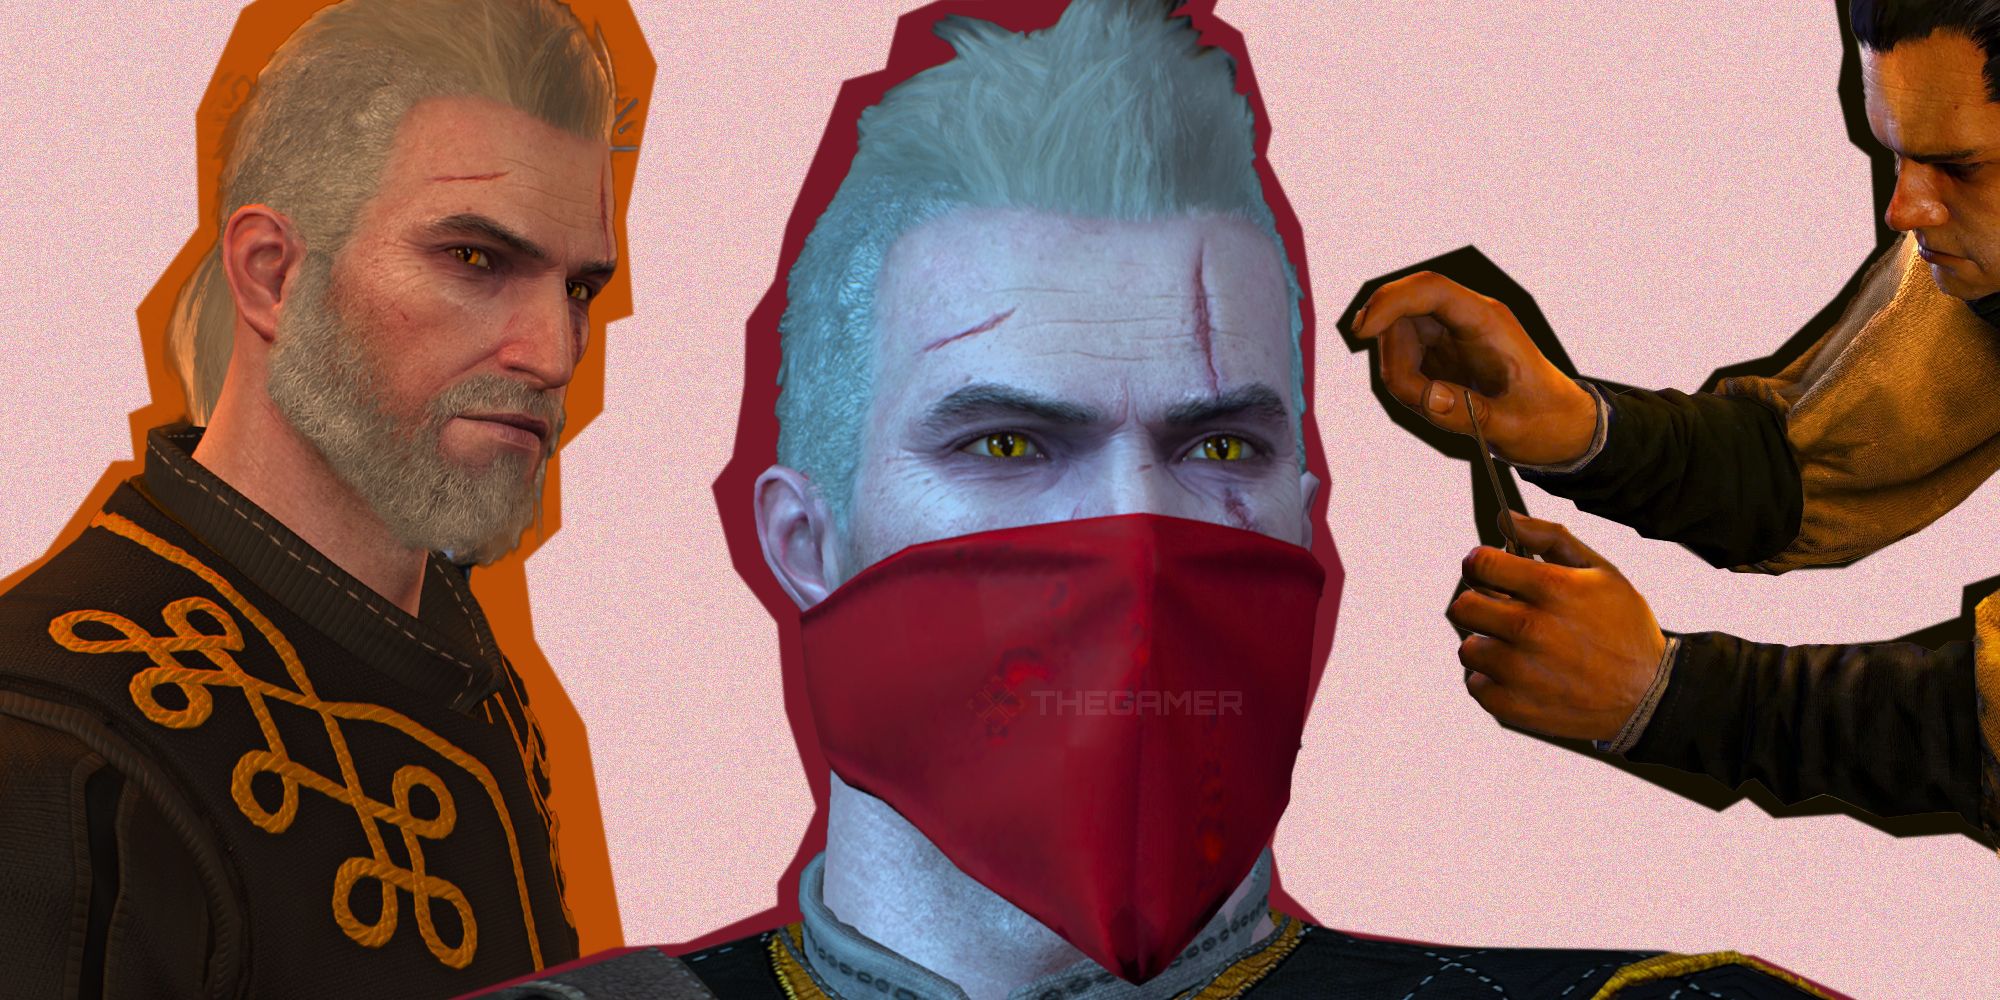 A collage of Geralt getting his haircut in The Witcher 3